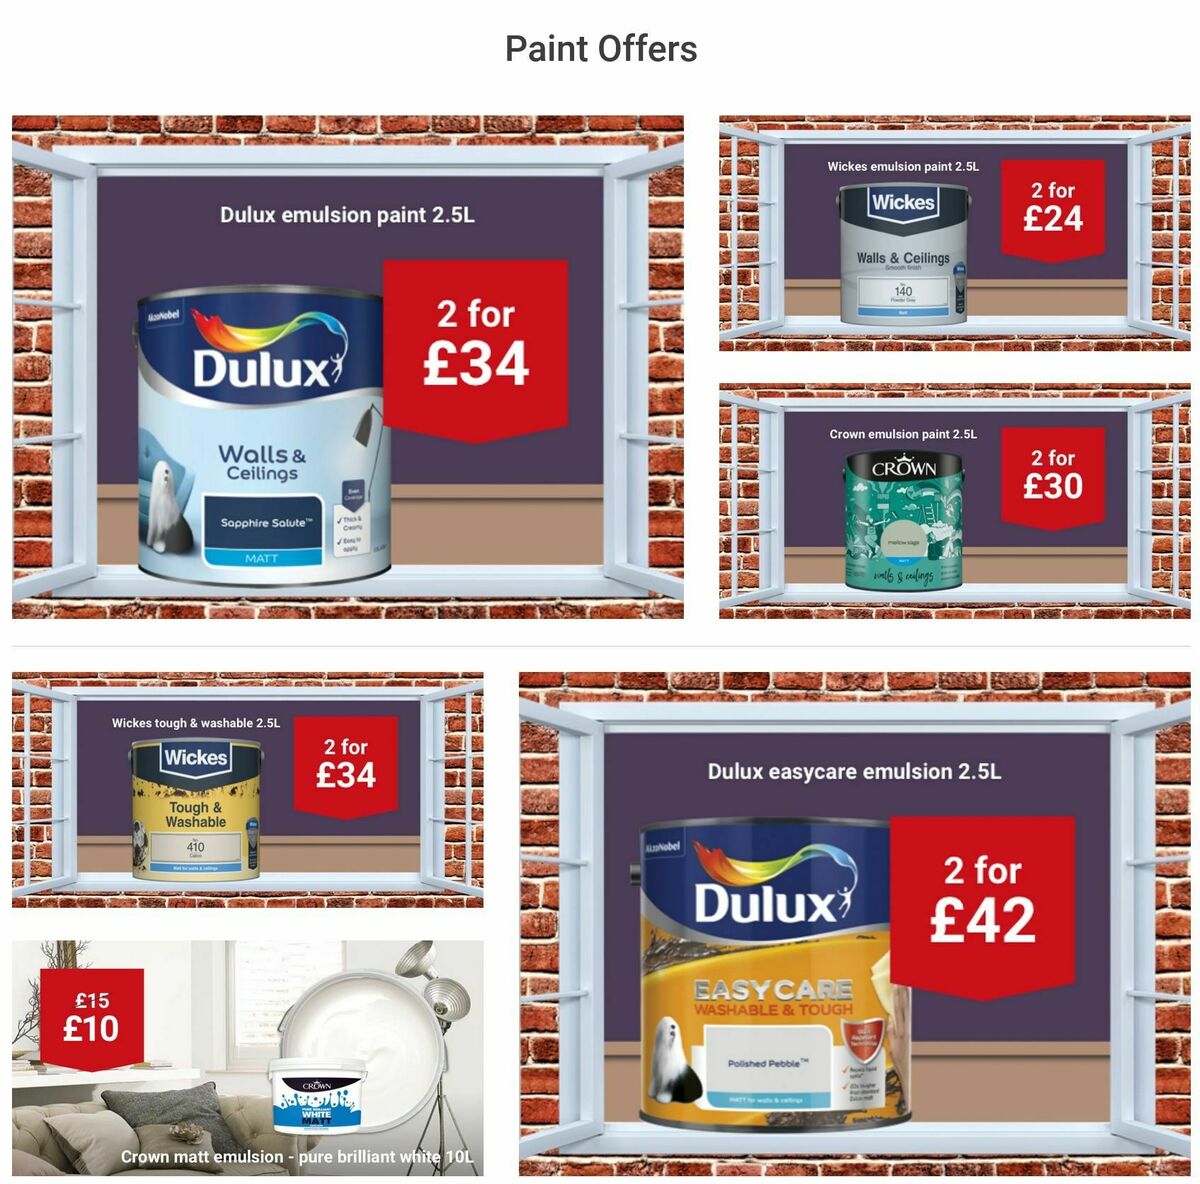 Wickes Offers from 15 November